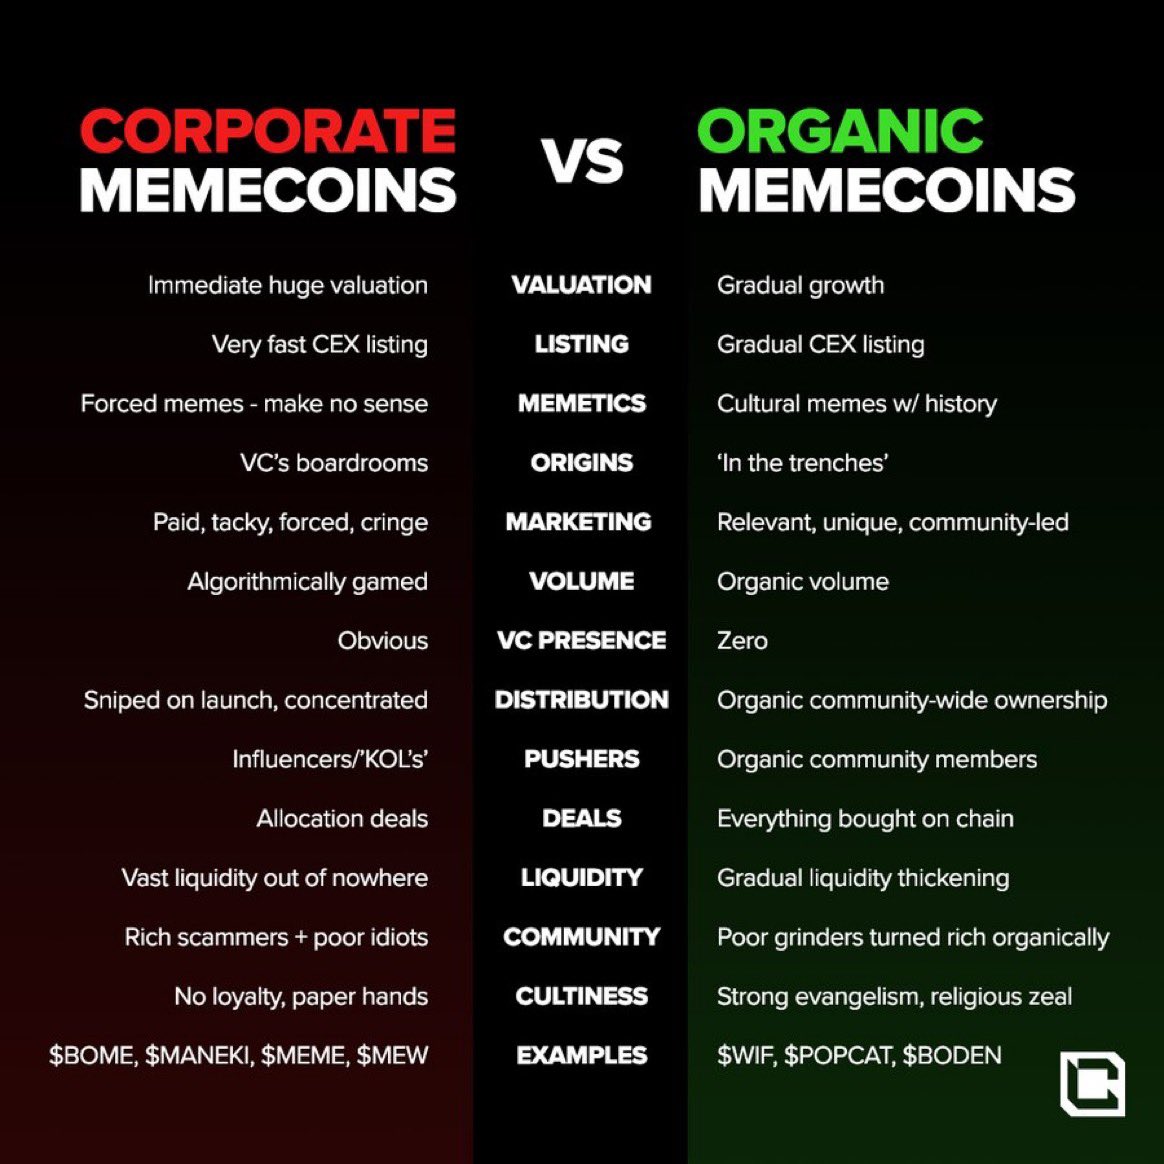 I think I know a certain bear coin that falls HEAVY on the right side. Study organic memecoins, study $BOBO 🐻🫡